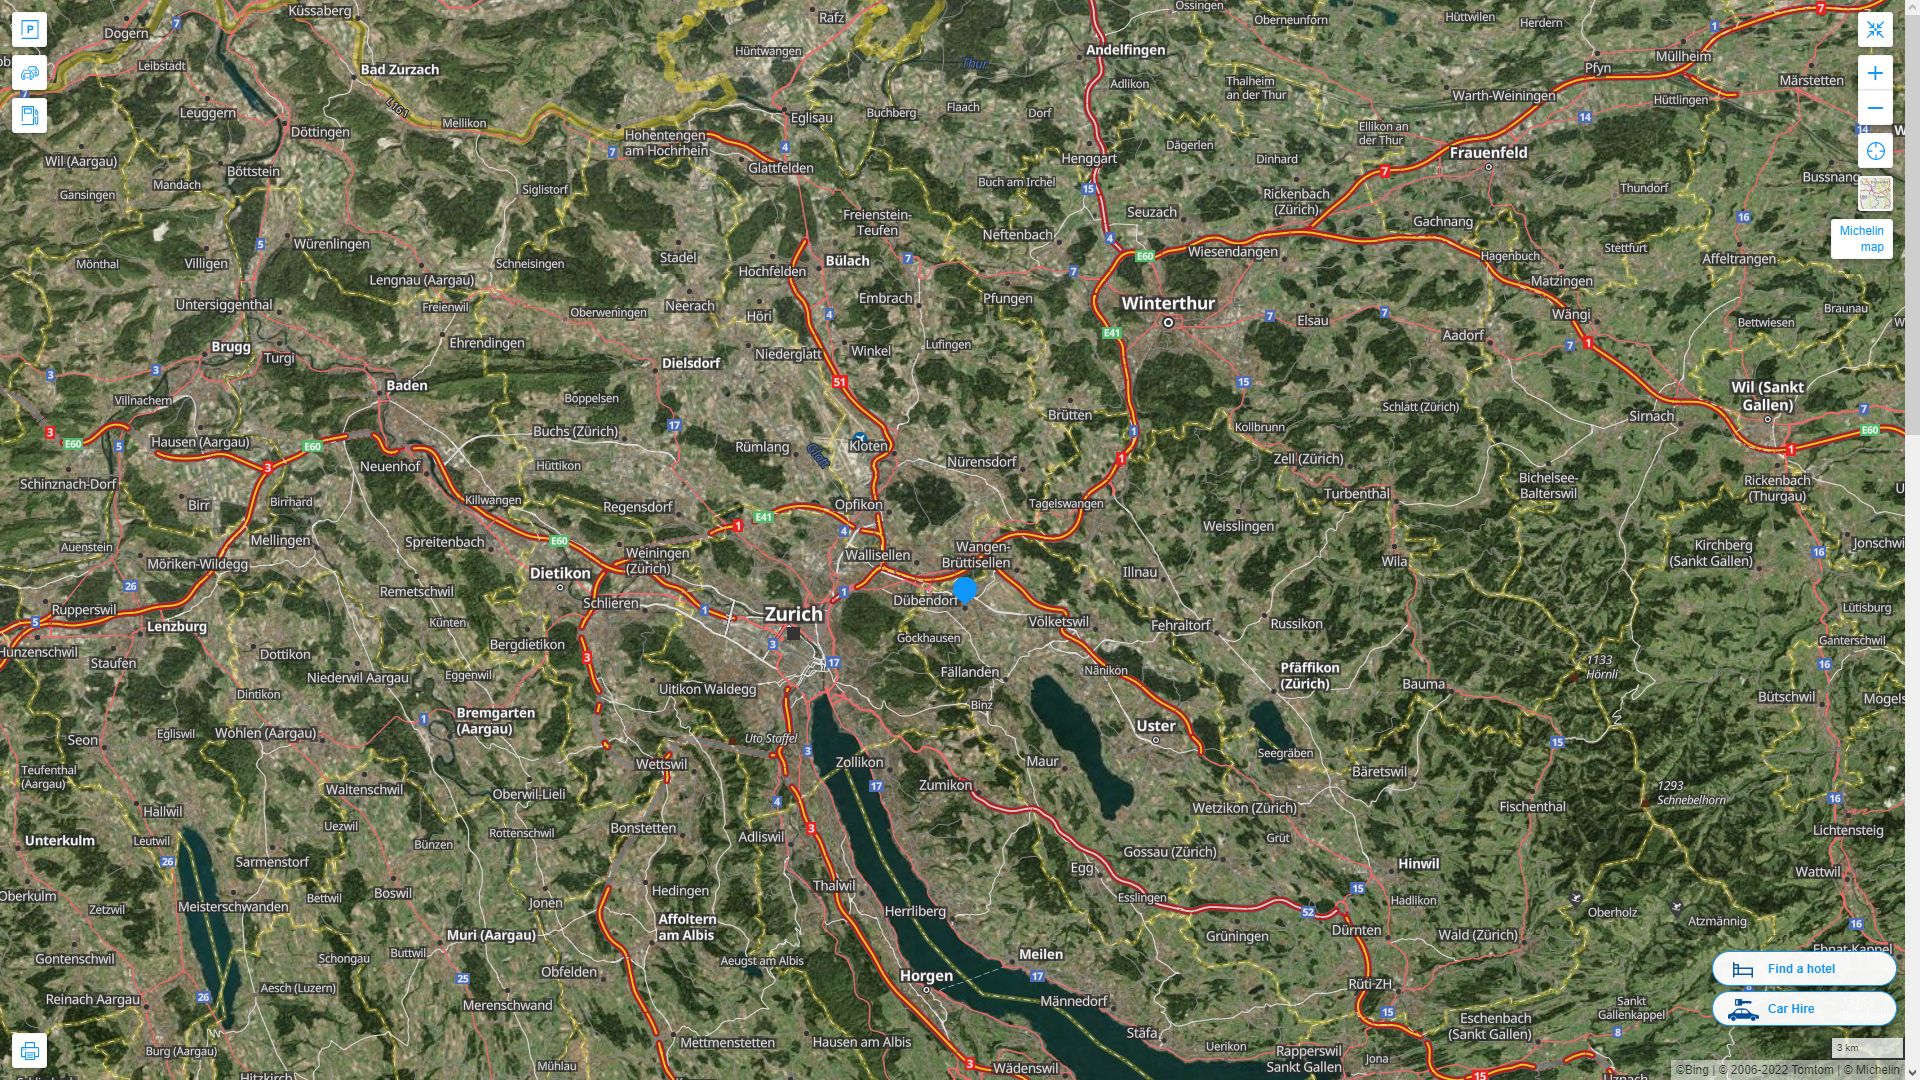 Dübendorf Highway and Road Map with Satellite View